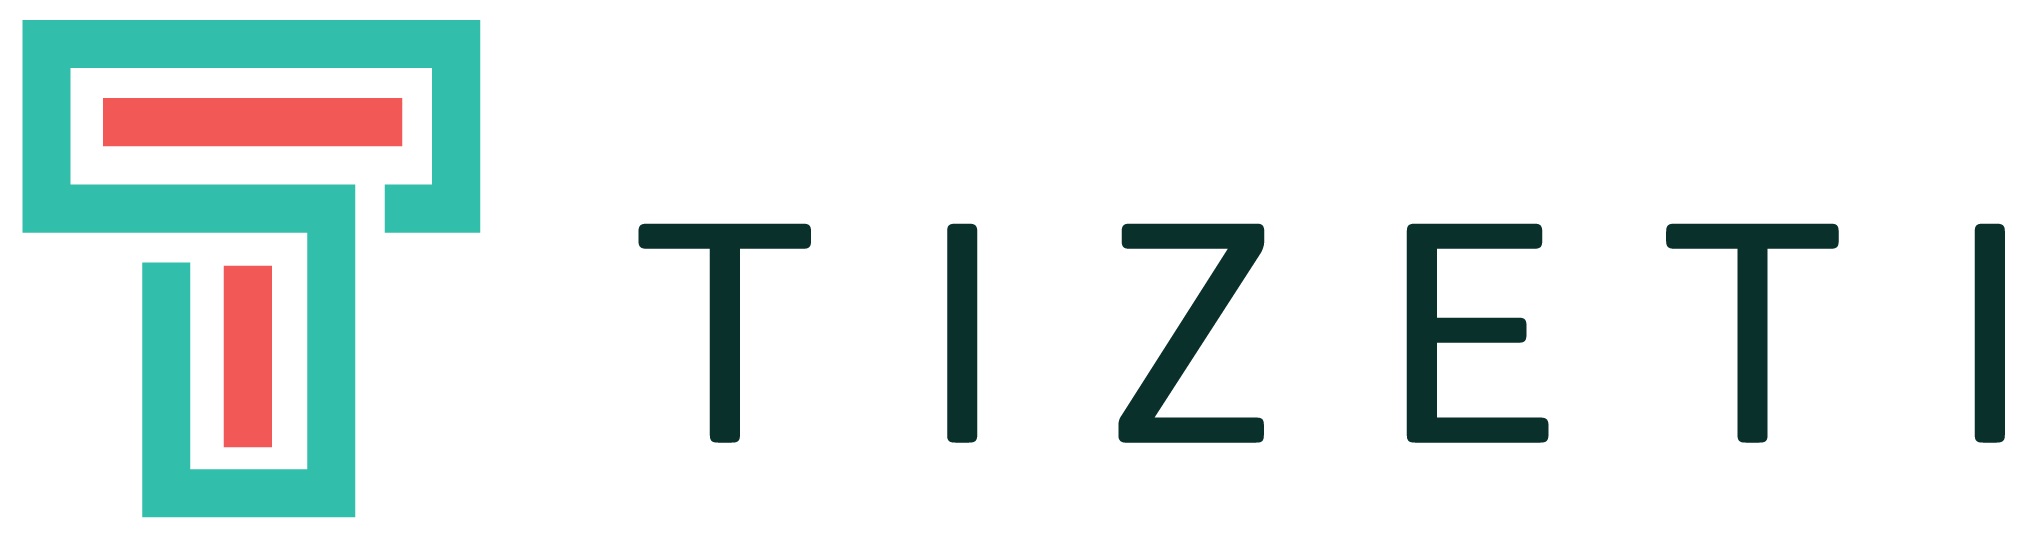 Tizeti rolls out high-speed 4G LTE in Edo with N4000/month broadband service